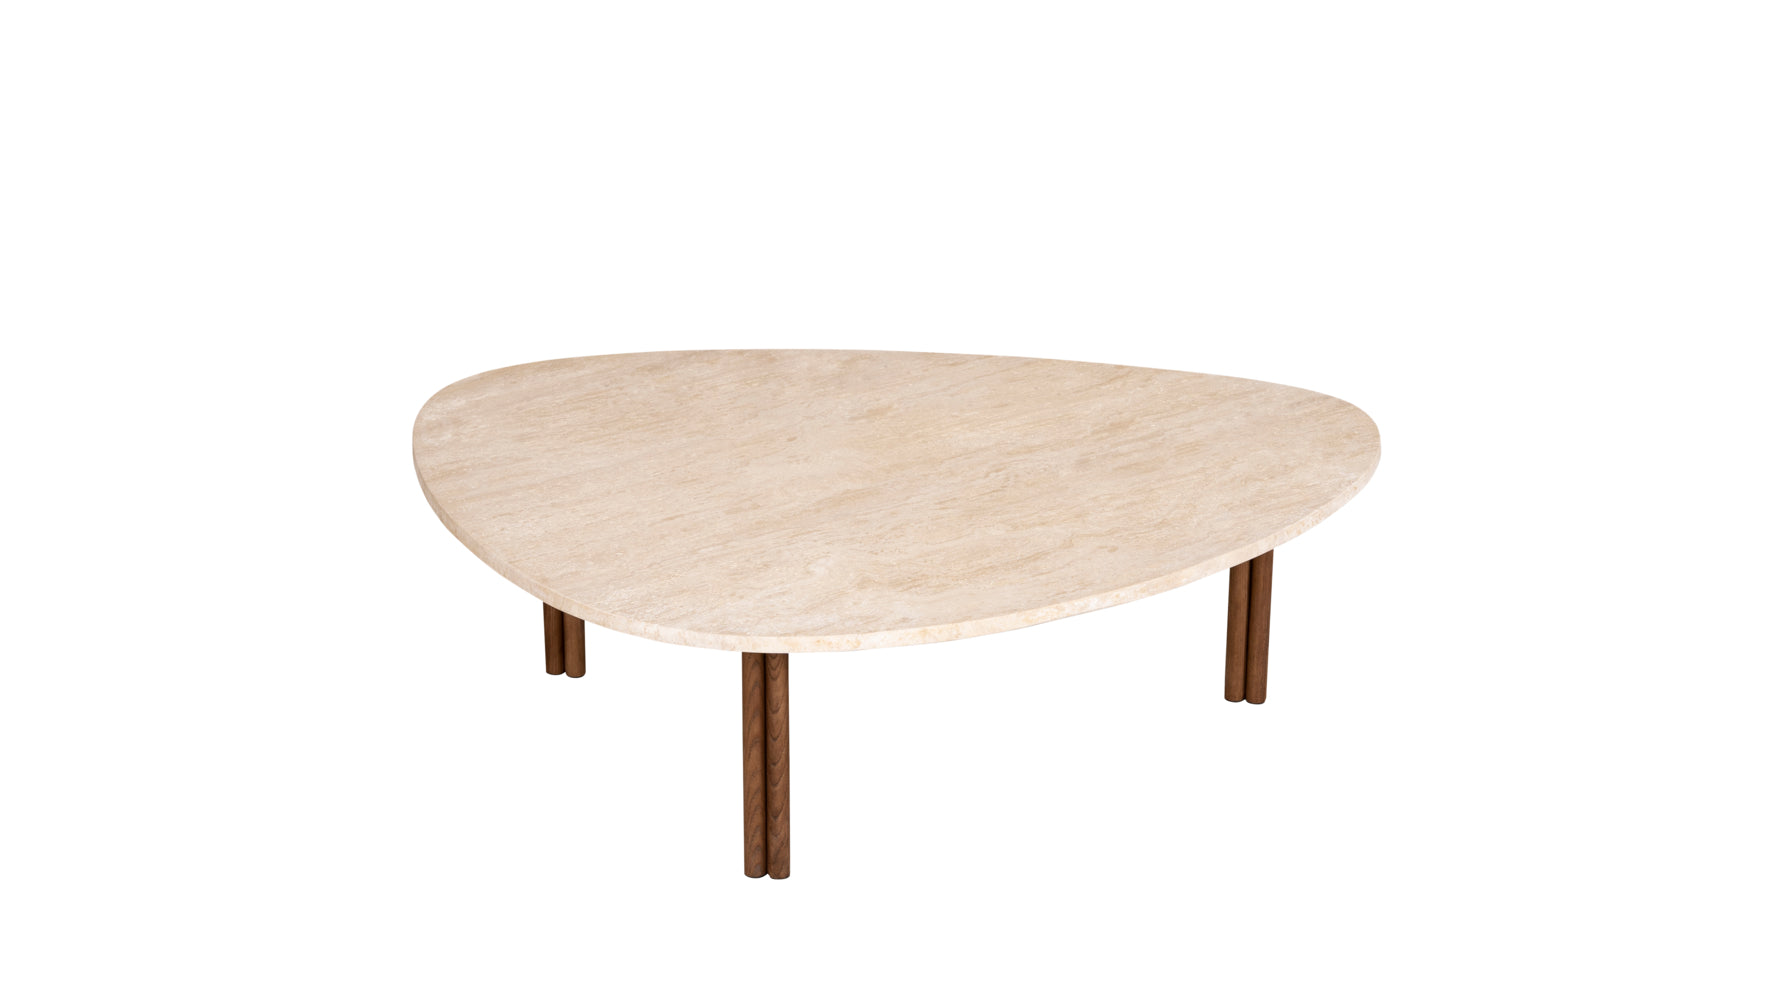 Better Together Coffee Table, Large, Beige Travertine/Walnut Stained Ash - Image 4